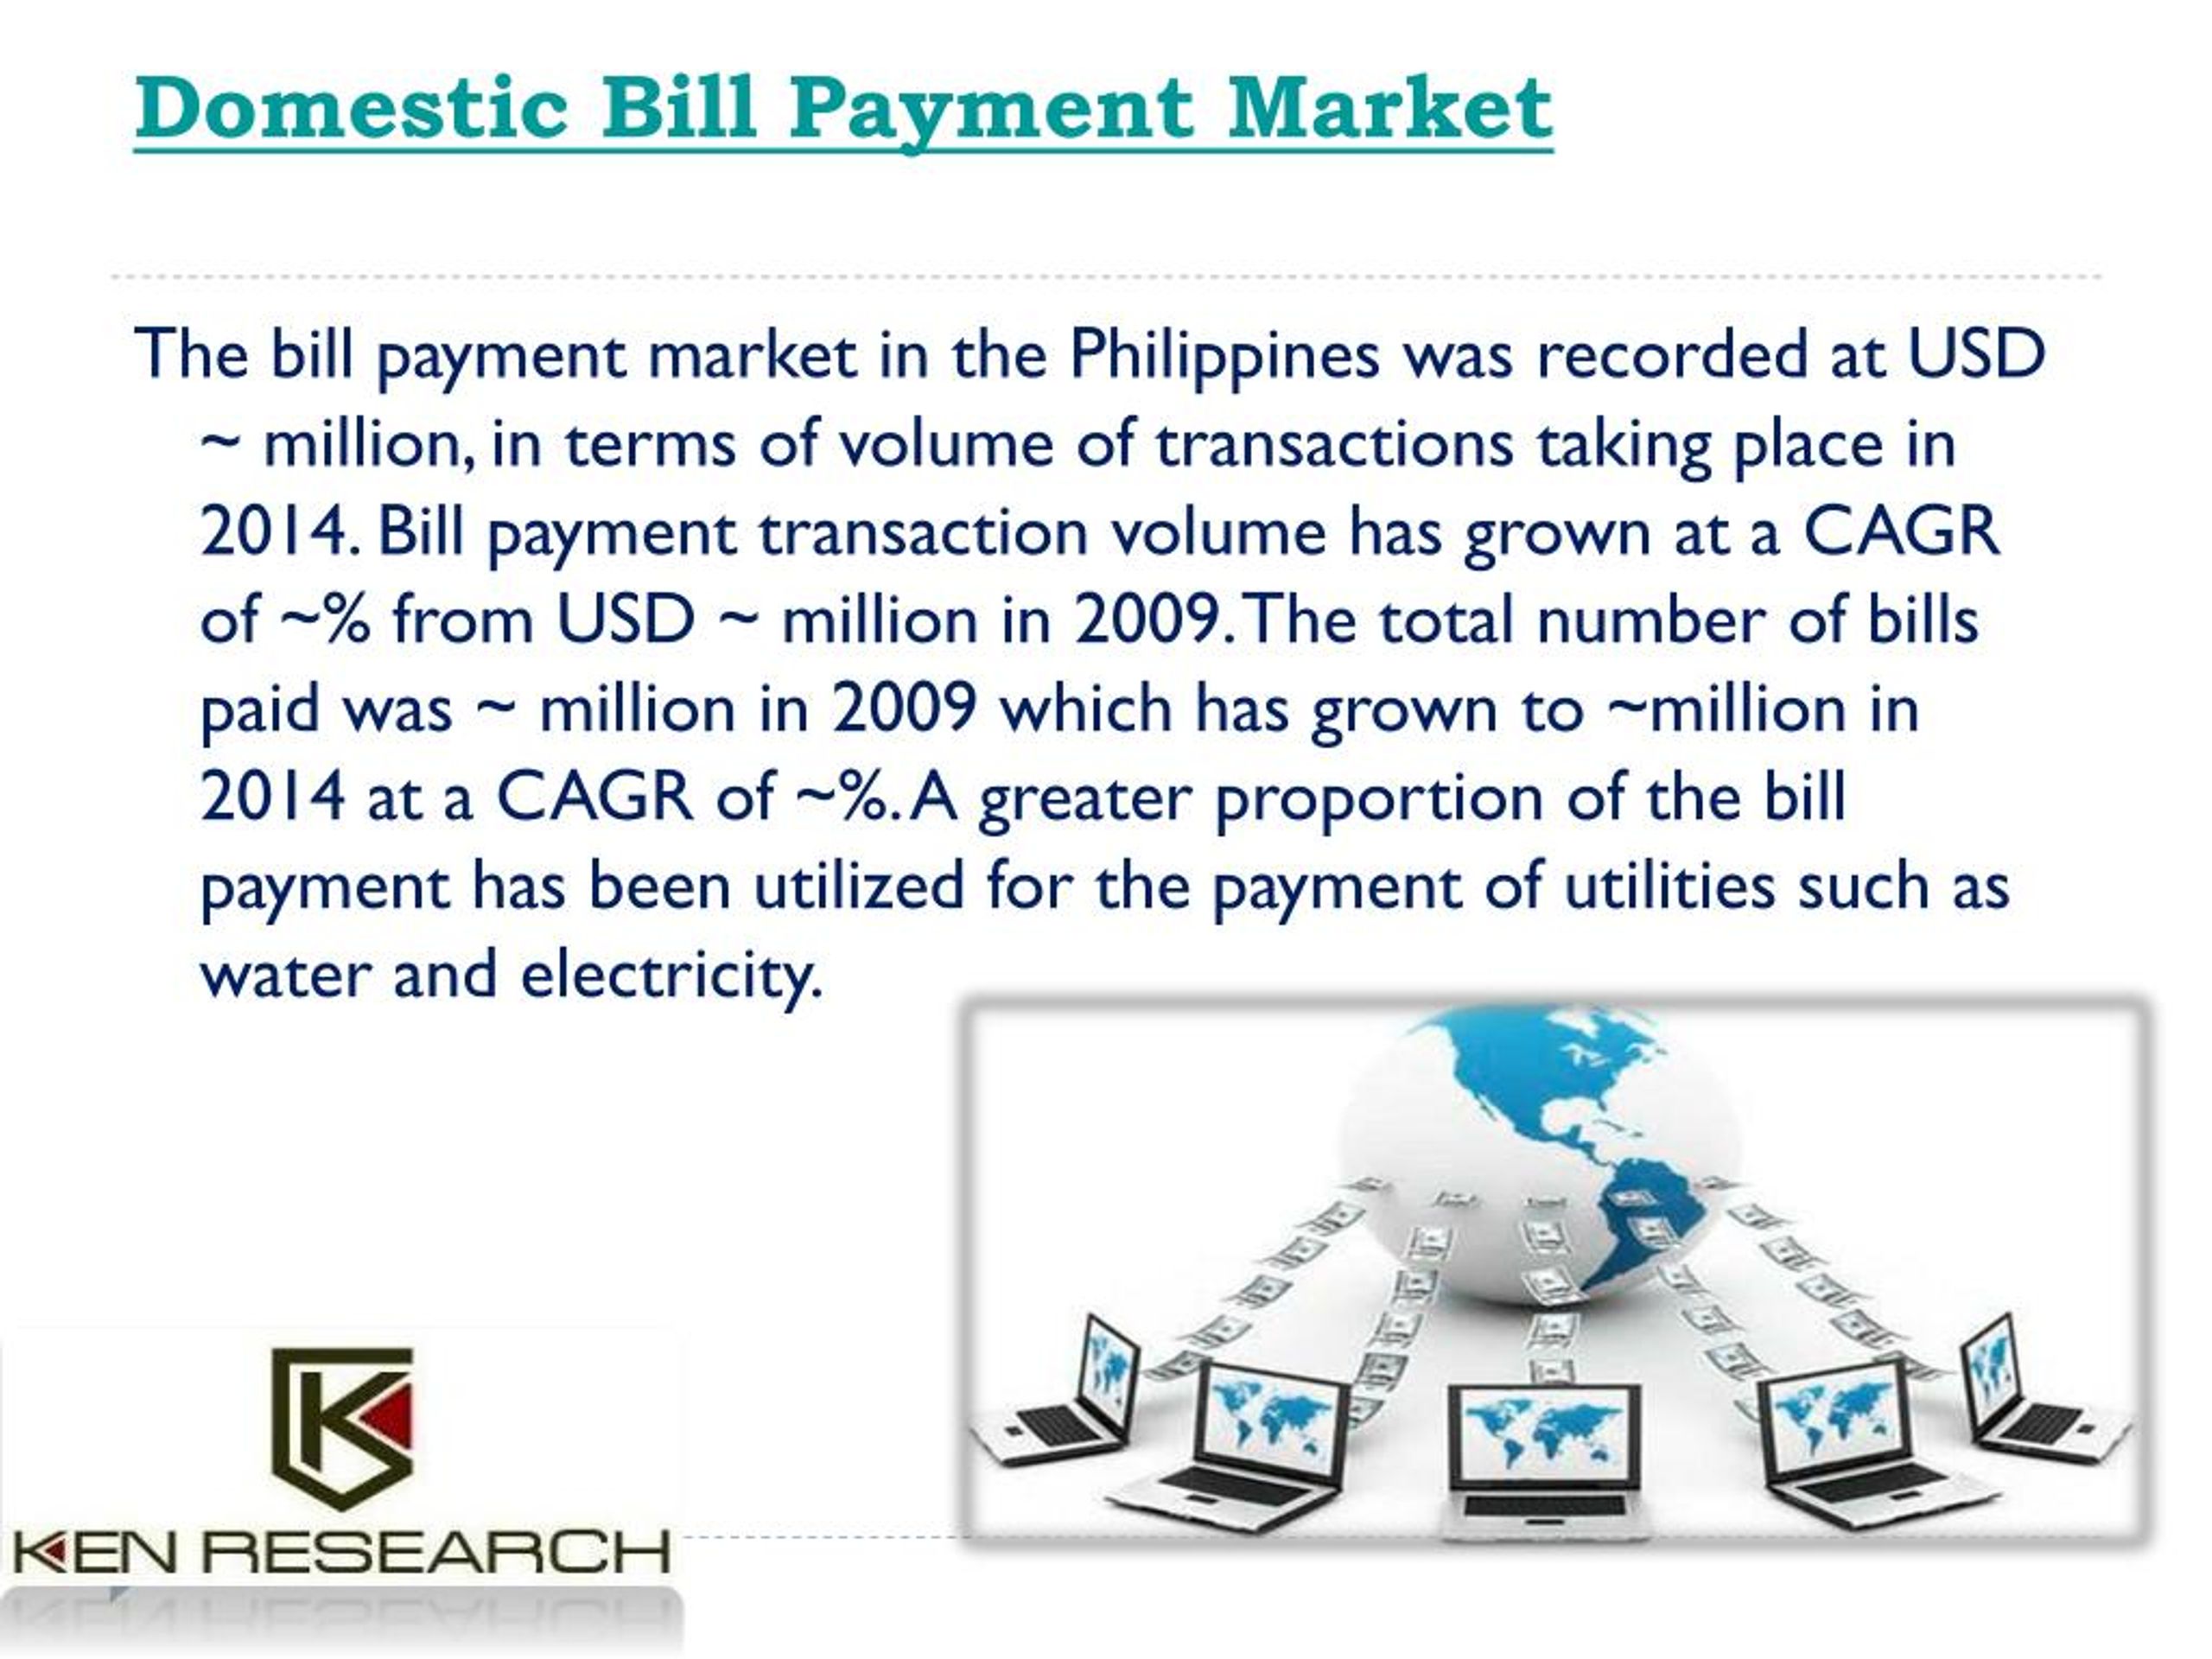 PPT - Philippines Domestic and International Money Transfer Industry Outlook to 2019 PowerPoint ...